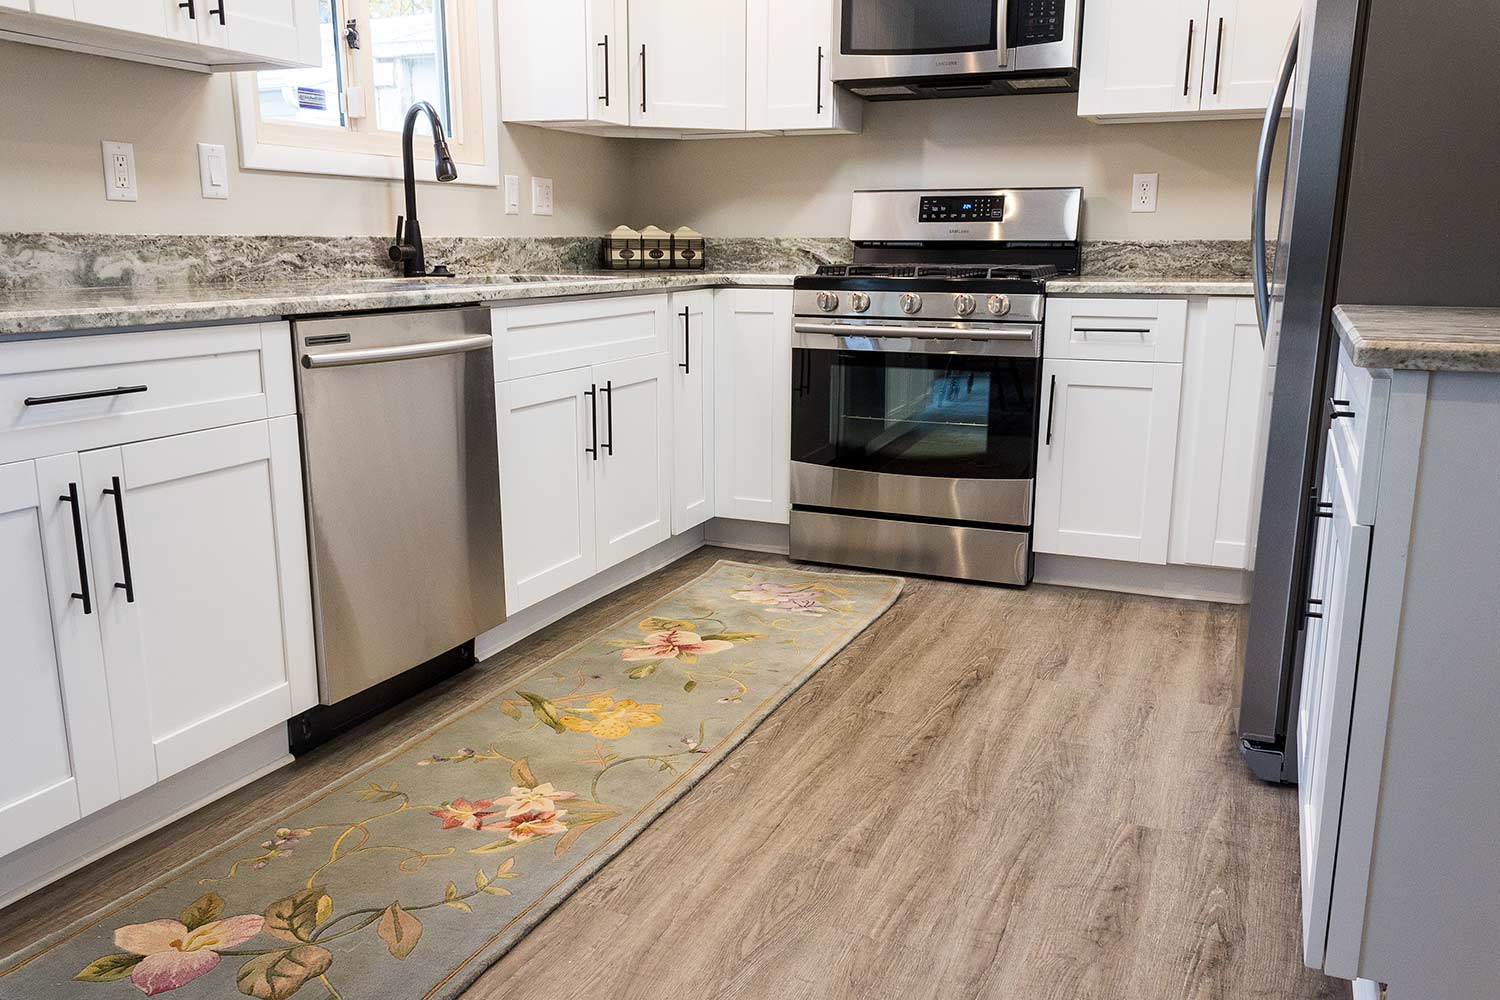 Tips For Cleaning Your Vinyl Flooring, Pictures Of Kitchens With Vinyl Plank Flooring